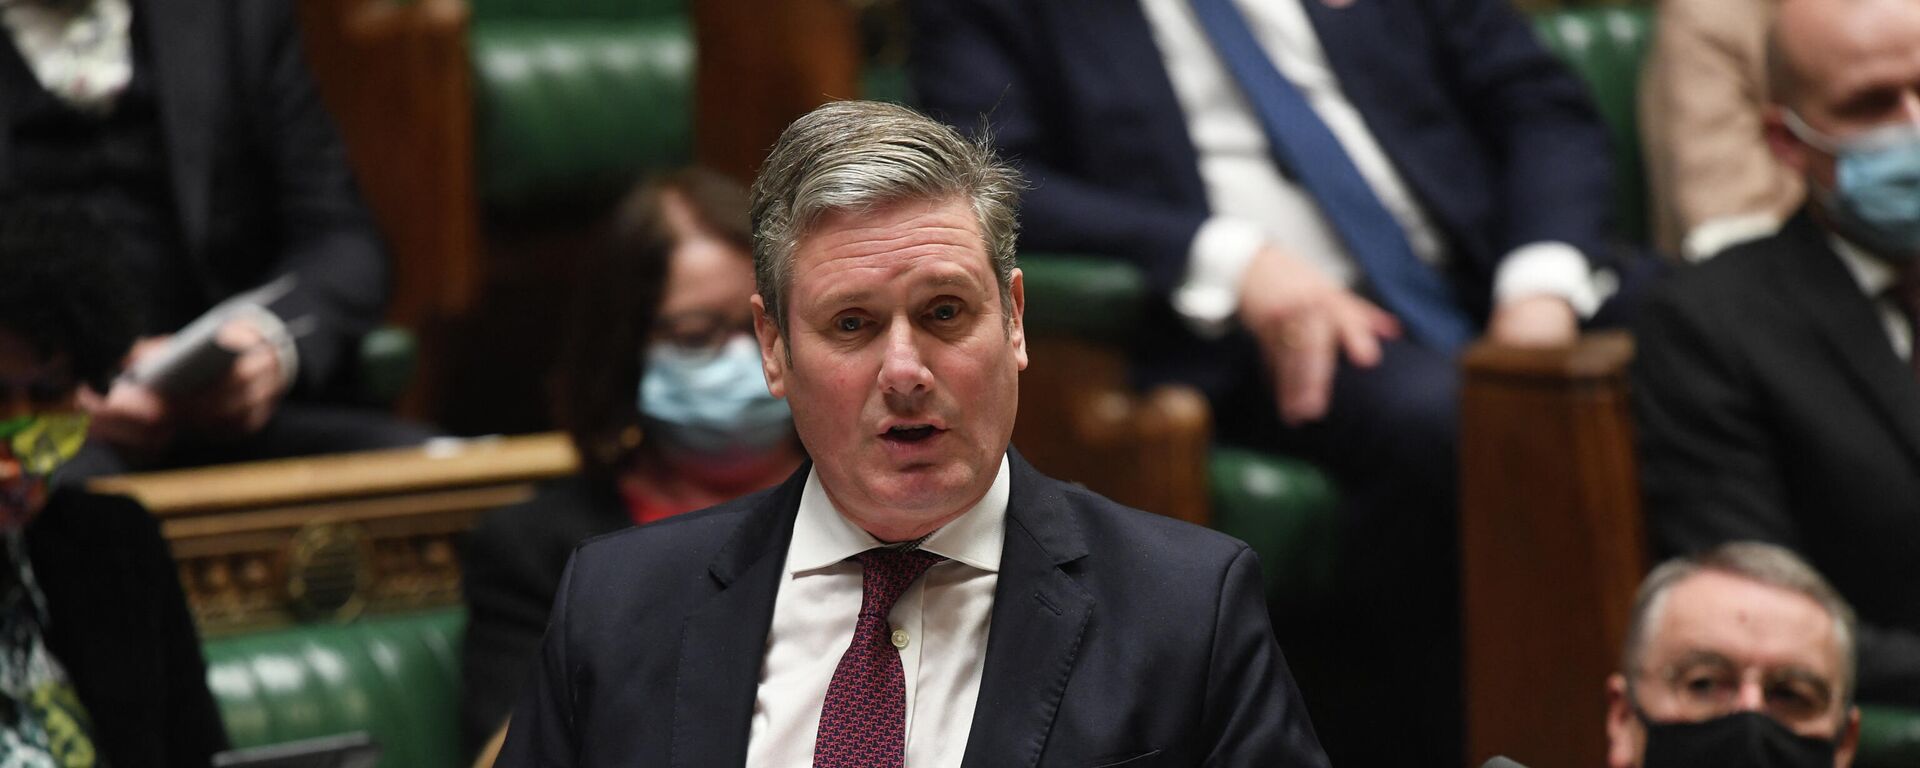 A handout photograph released by the UK Parliament shows Britain's main opposition Labour Party leader Keir Starmer replying to the Prime Minister's statement about the COP26 climate conference in the House of Commons in London on November 15, 2021 - Sputnik International, 1920, 16.01.2022